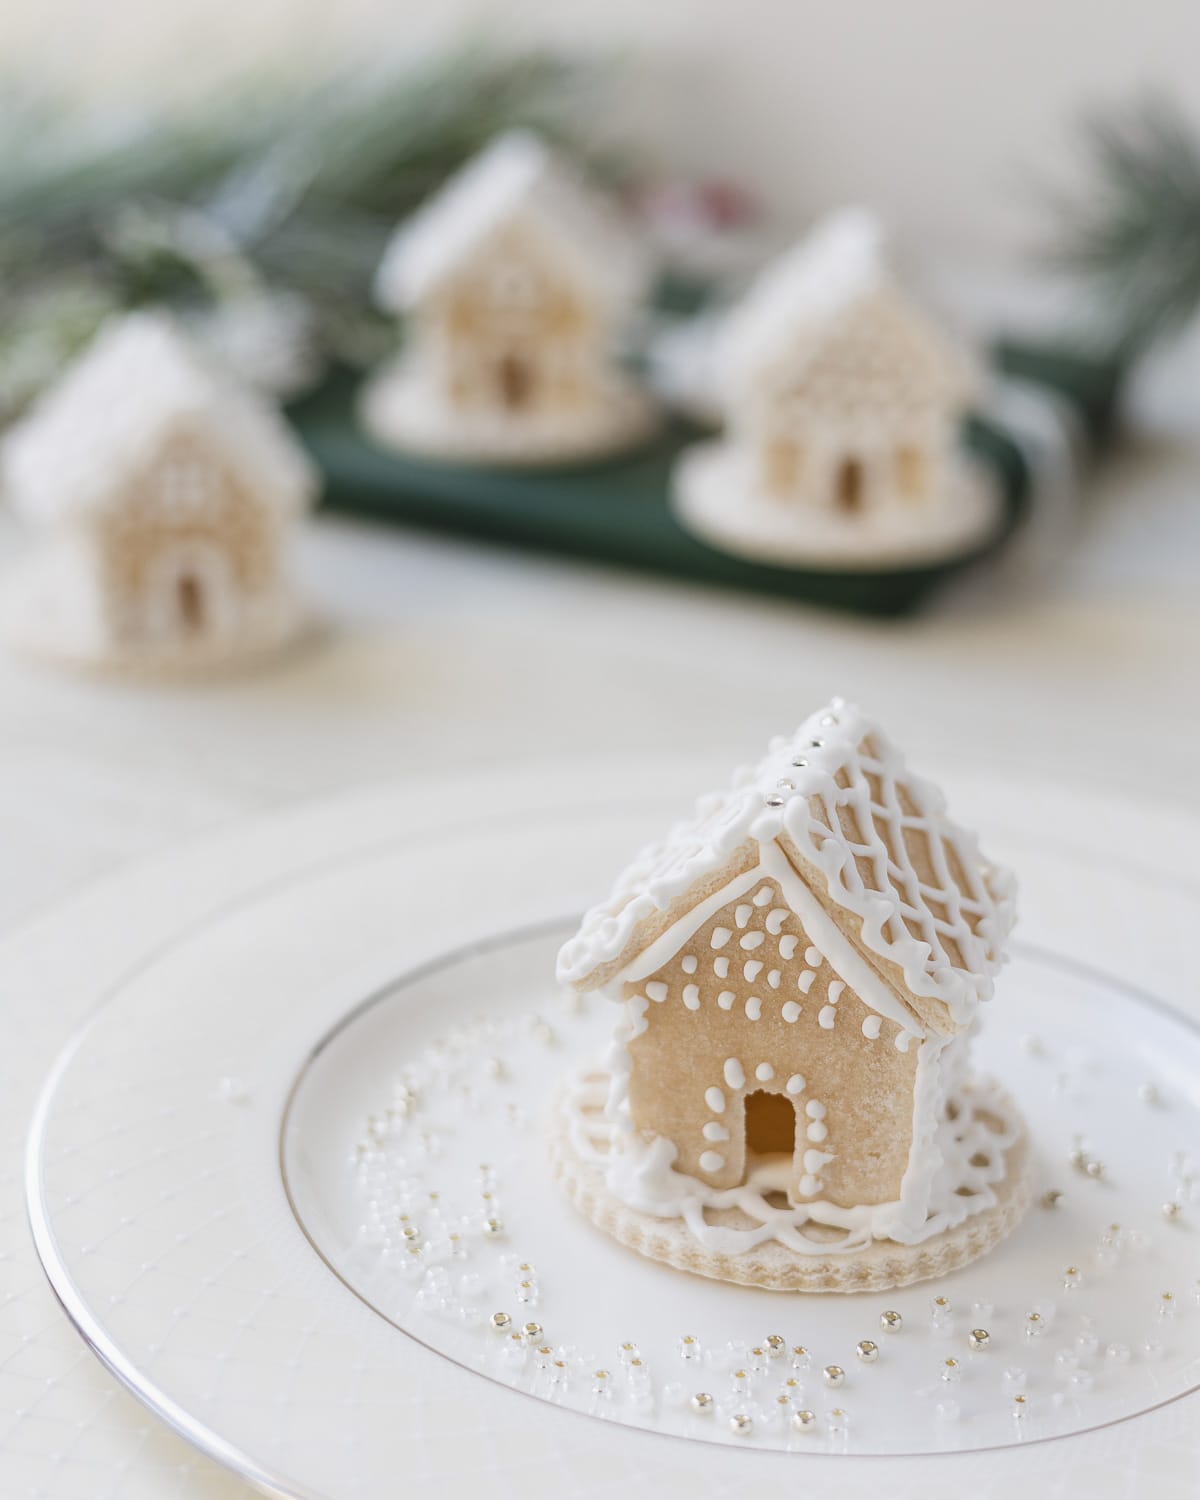 A white salt dough mini gingerbread house on a plate with scattered seed beads.